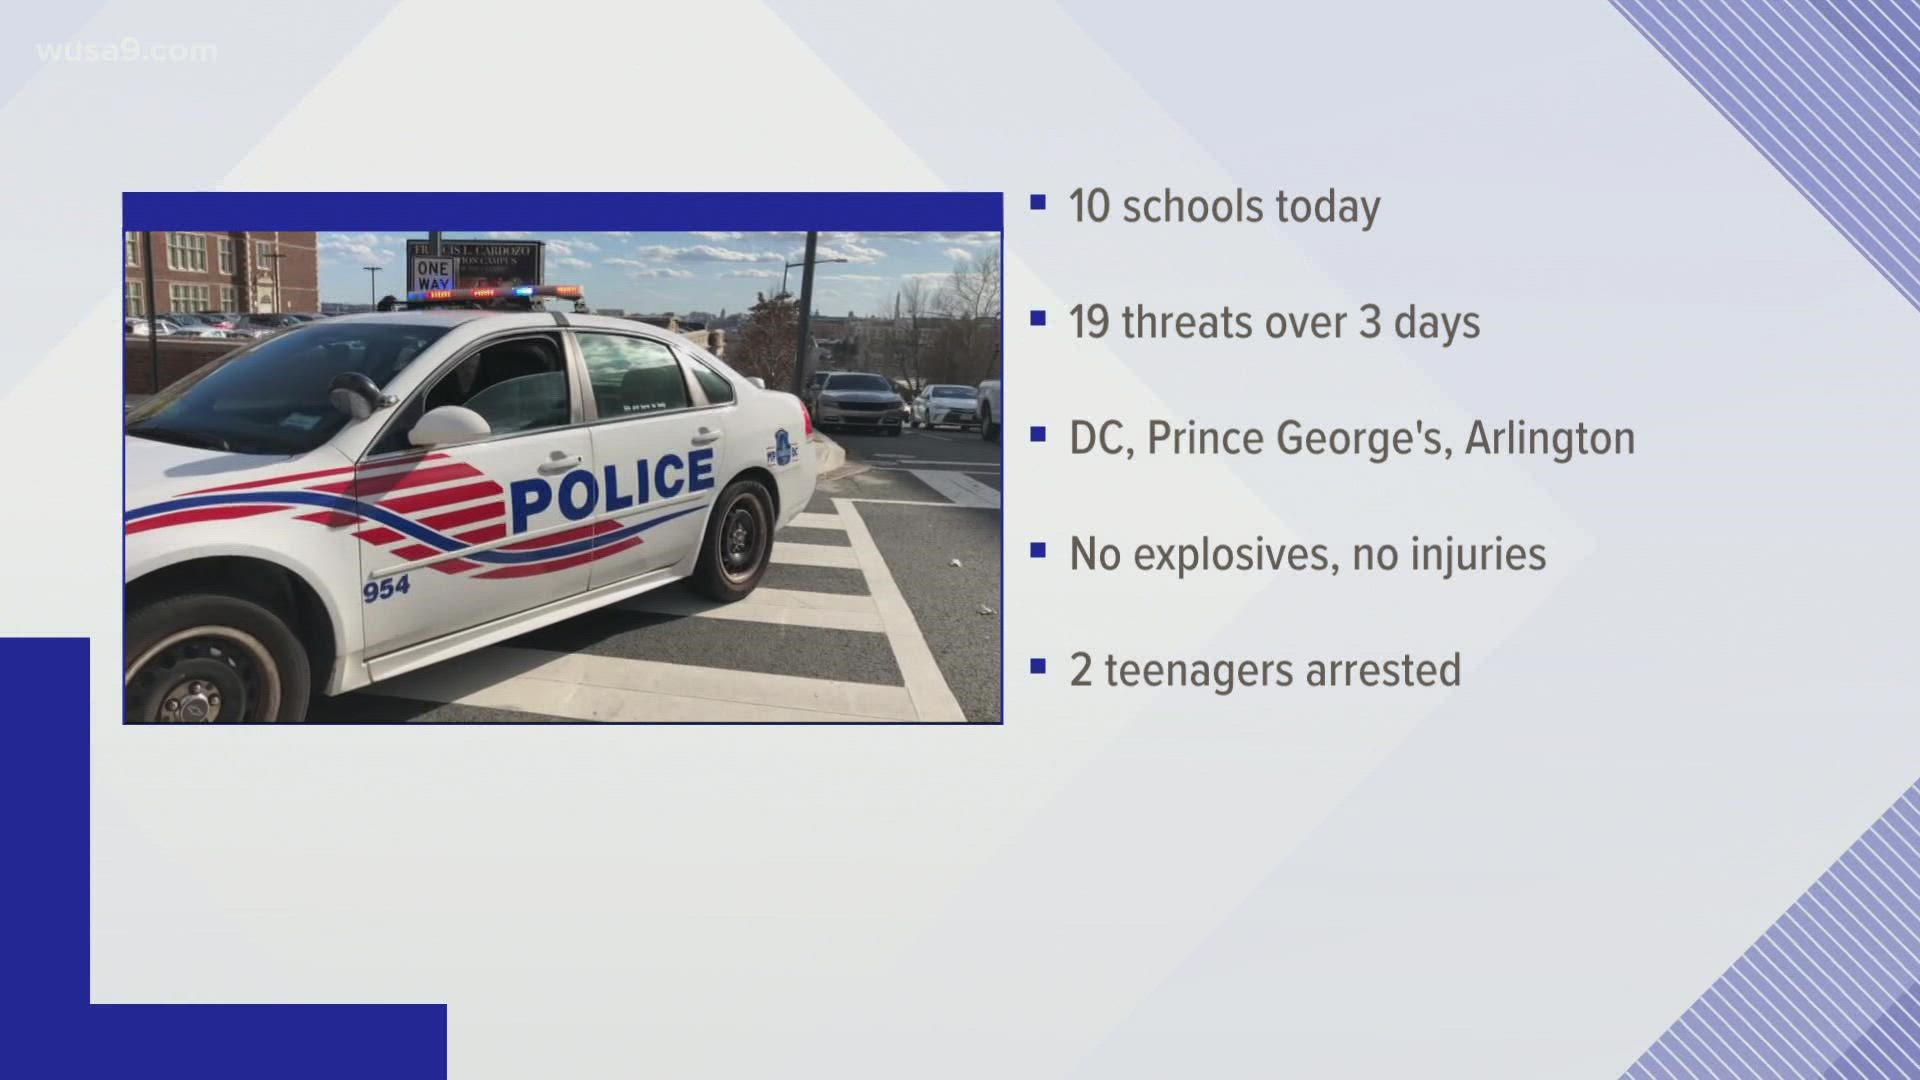 Threats made to schools regionwide - several in DC and Prince George's County, 1 in Arlington reported on Thursday.